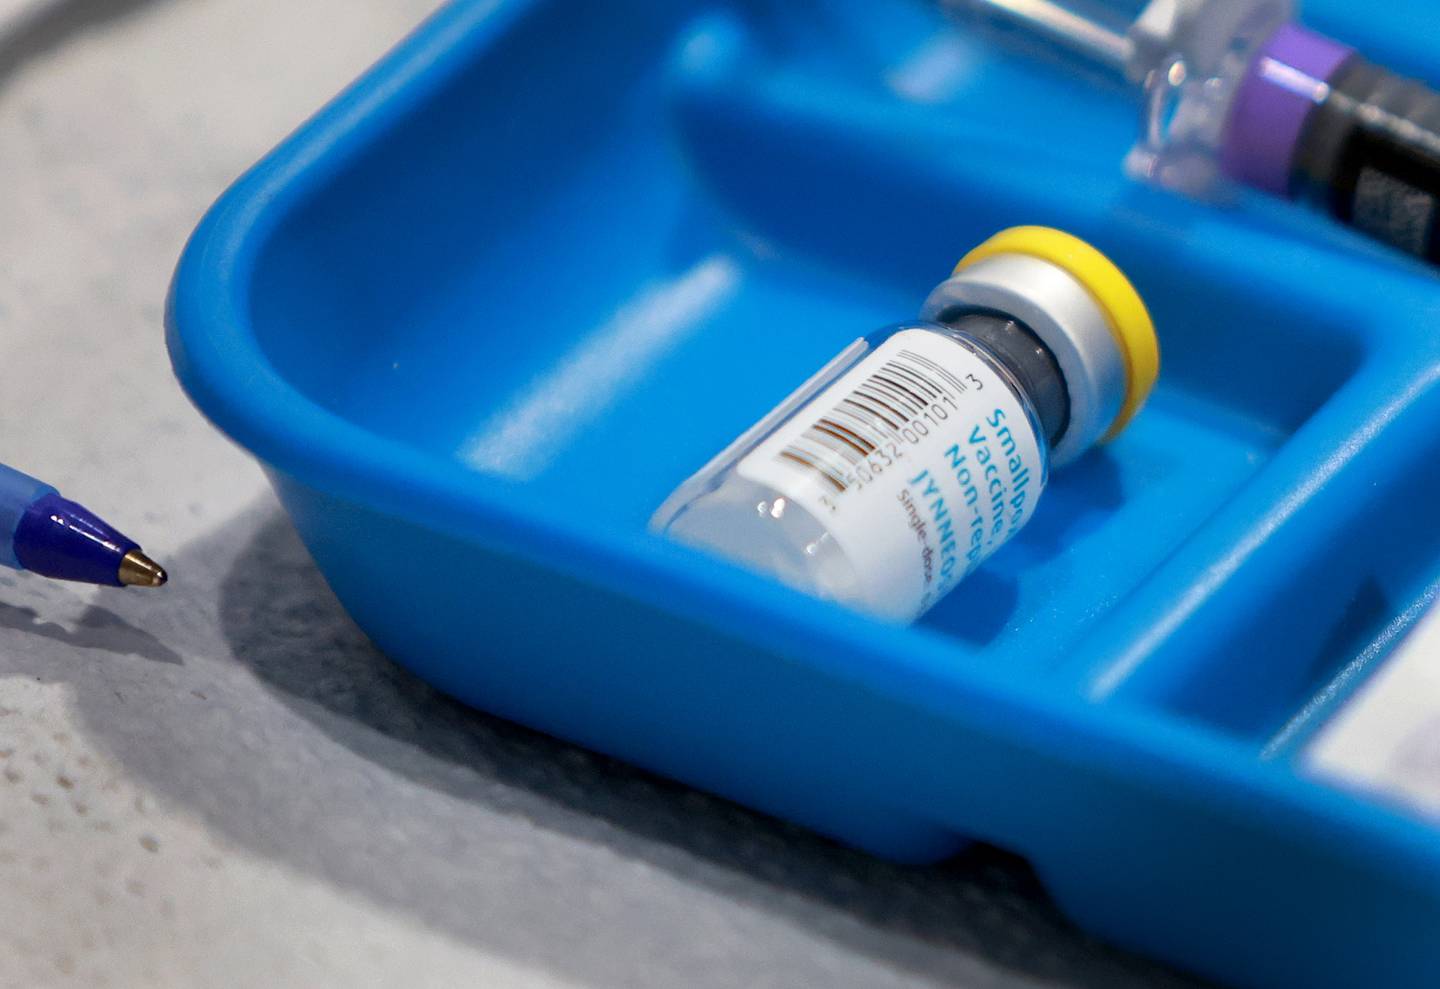 A vial of smallpox/monkeypox vaccine is seen during a vaccination event at the Pride Center on July 12, 2022 in Wilton Manors, Florida. The center is offering the free smallpox/monkeypox vaccinations from the Florida Department of Health in Broward County as South Florida leads the state in the number of people infected.